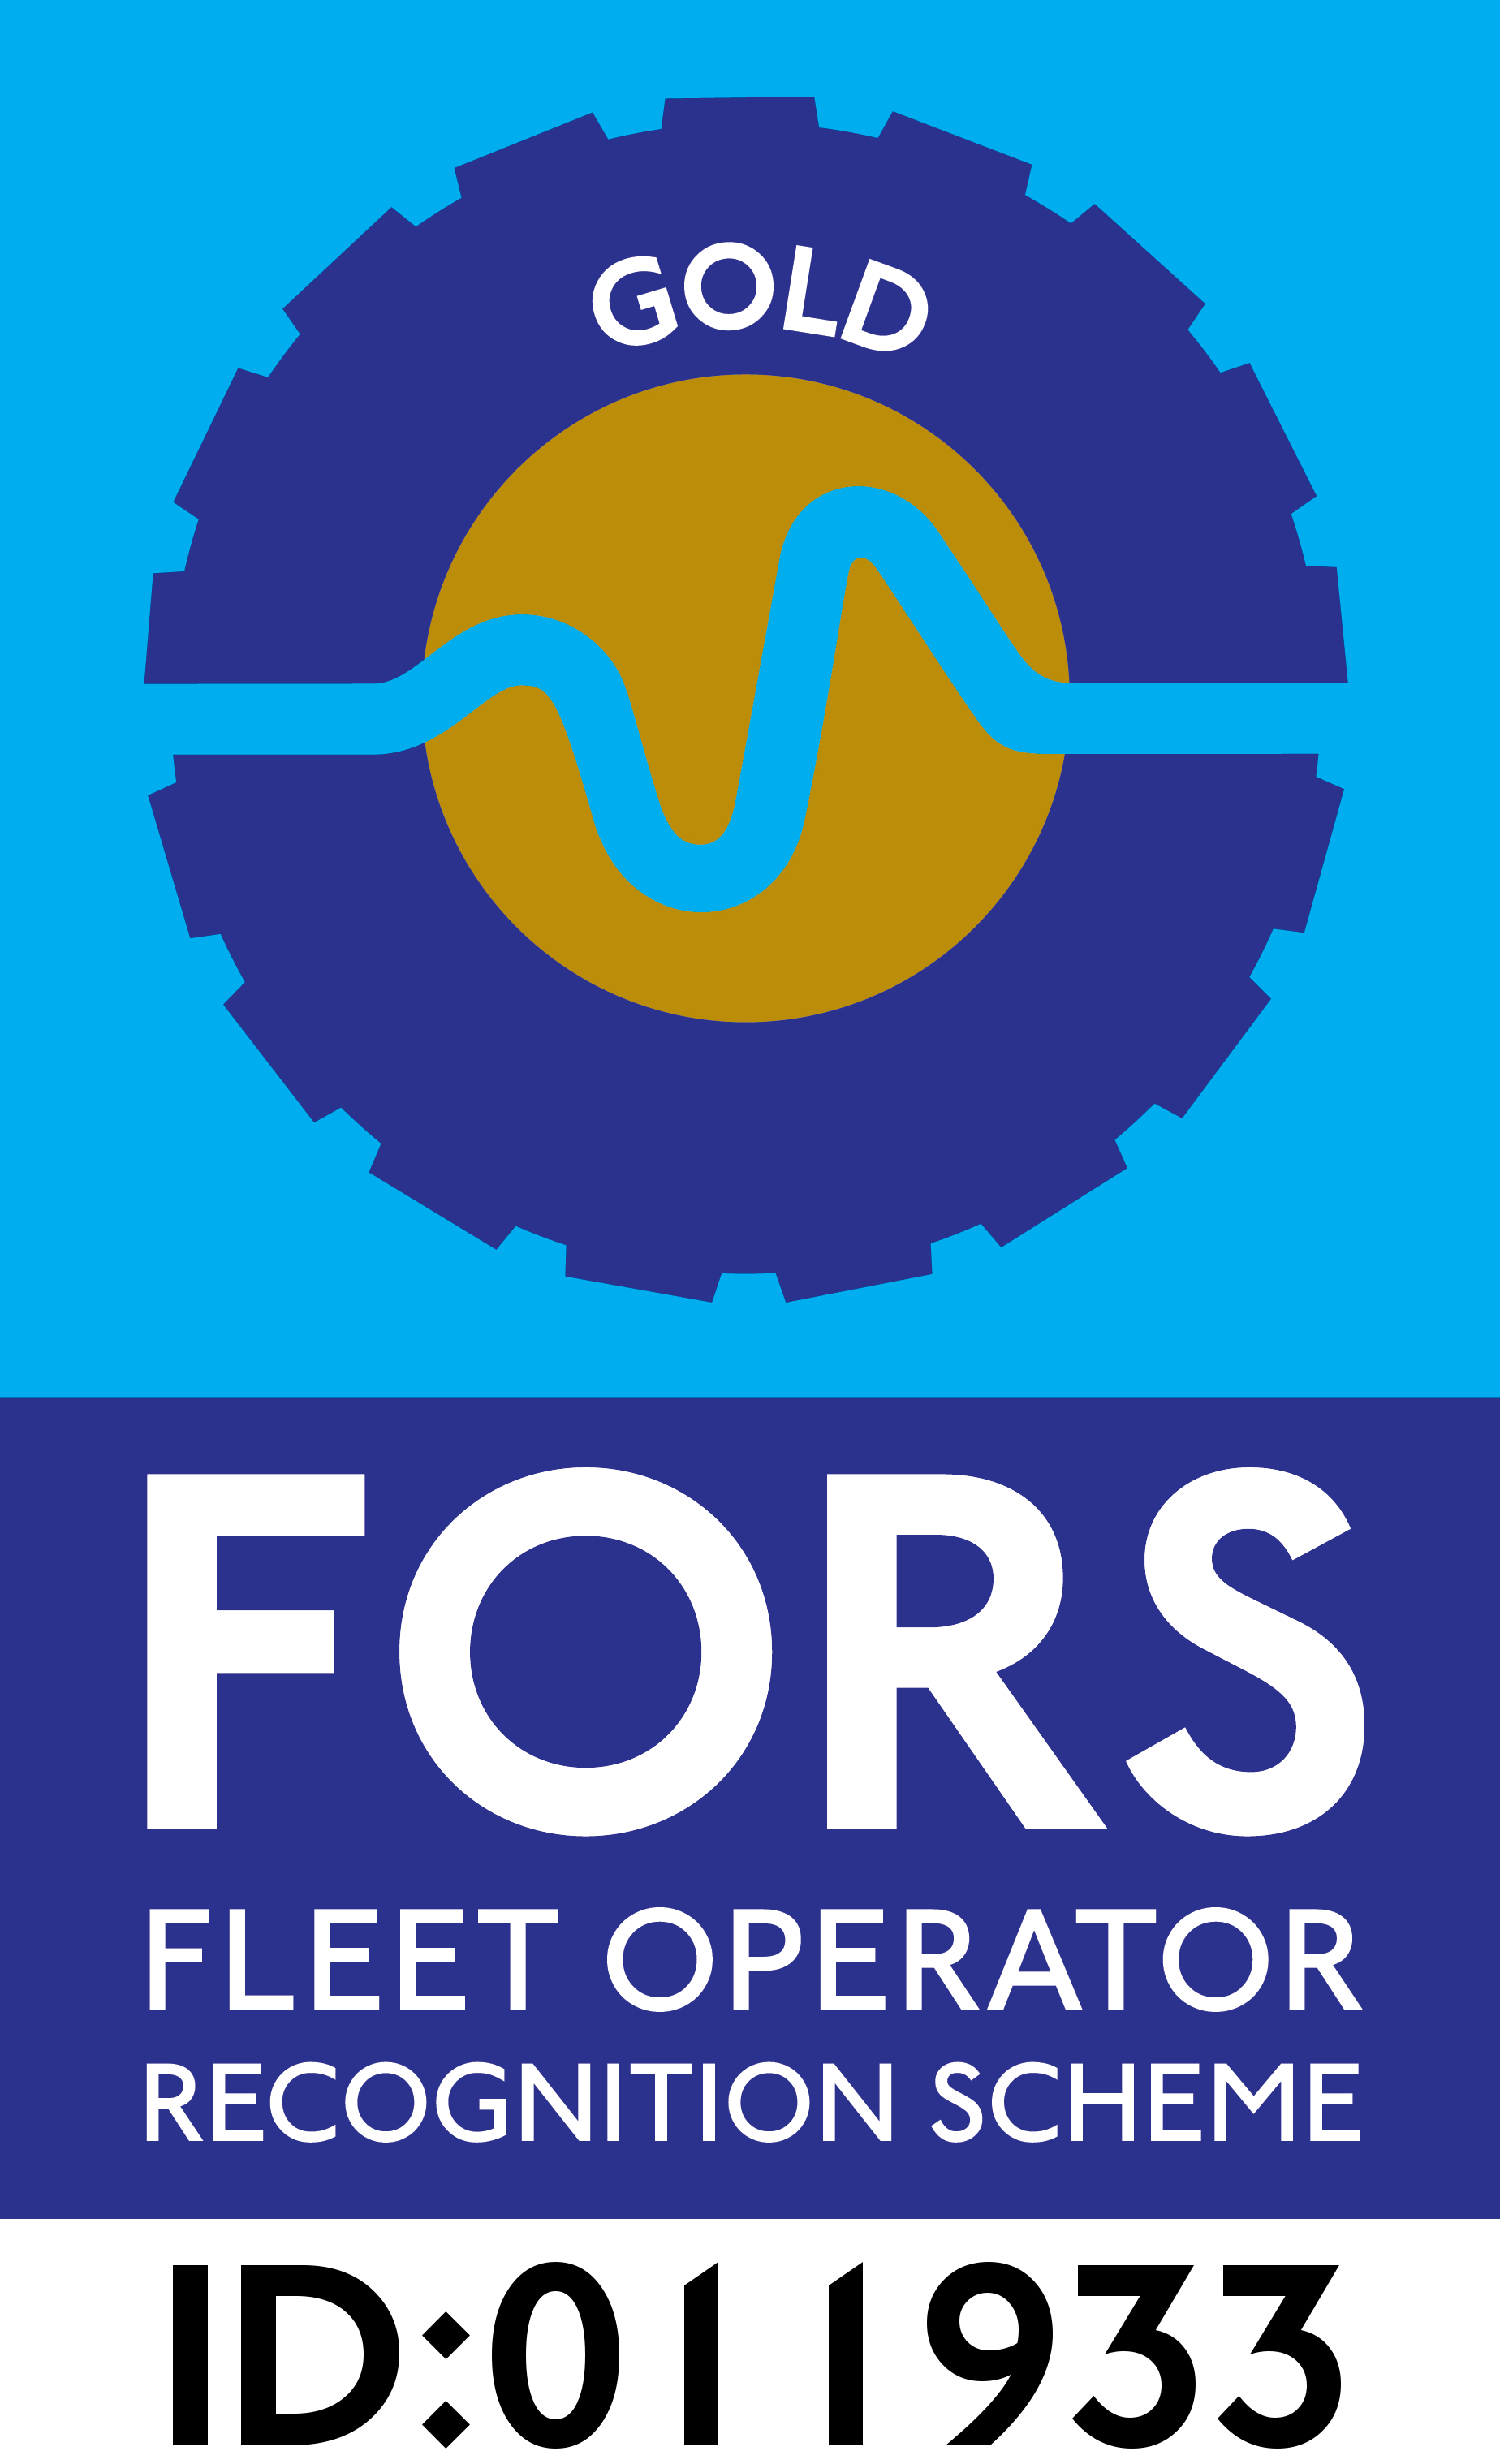 fors silver